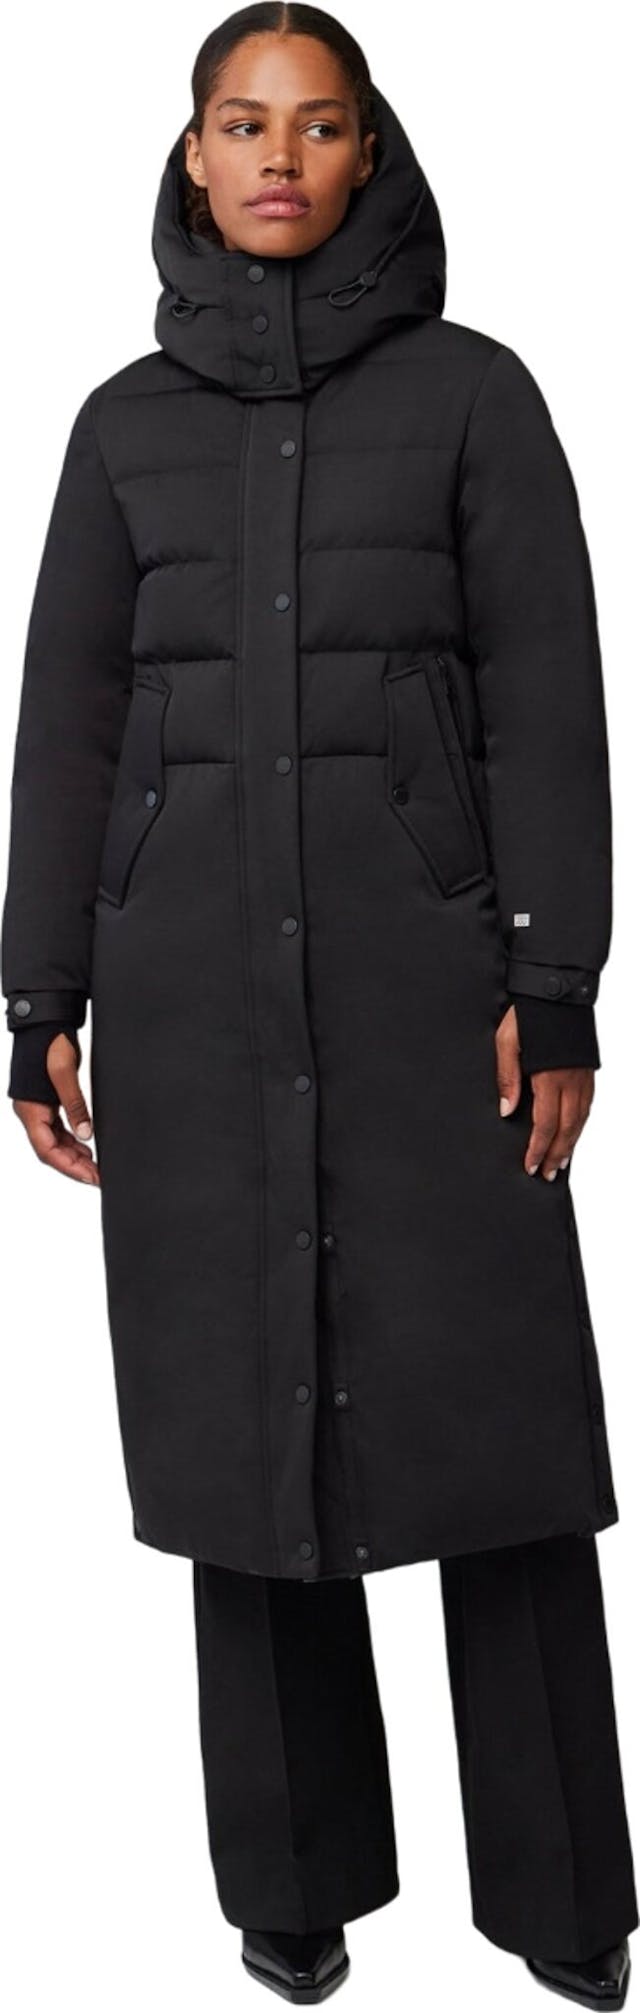 Product image for Vero Calf-Length Classic Down Coat with Hood - Women's